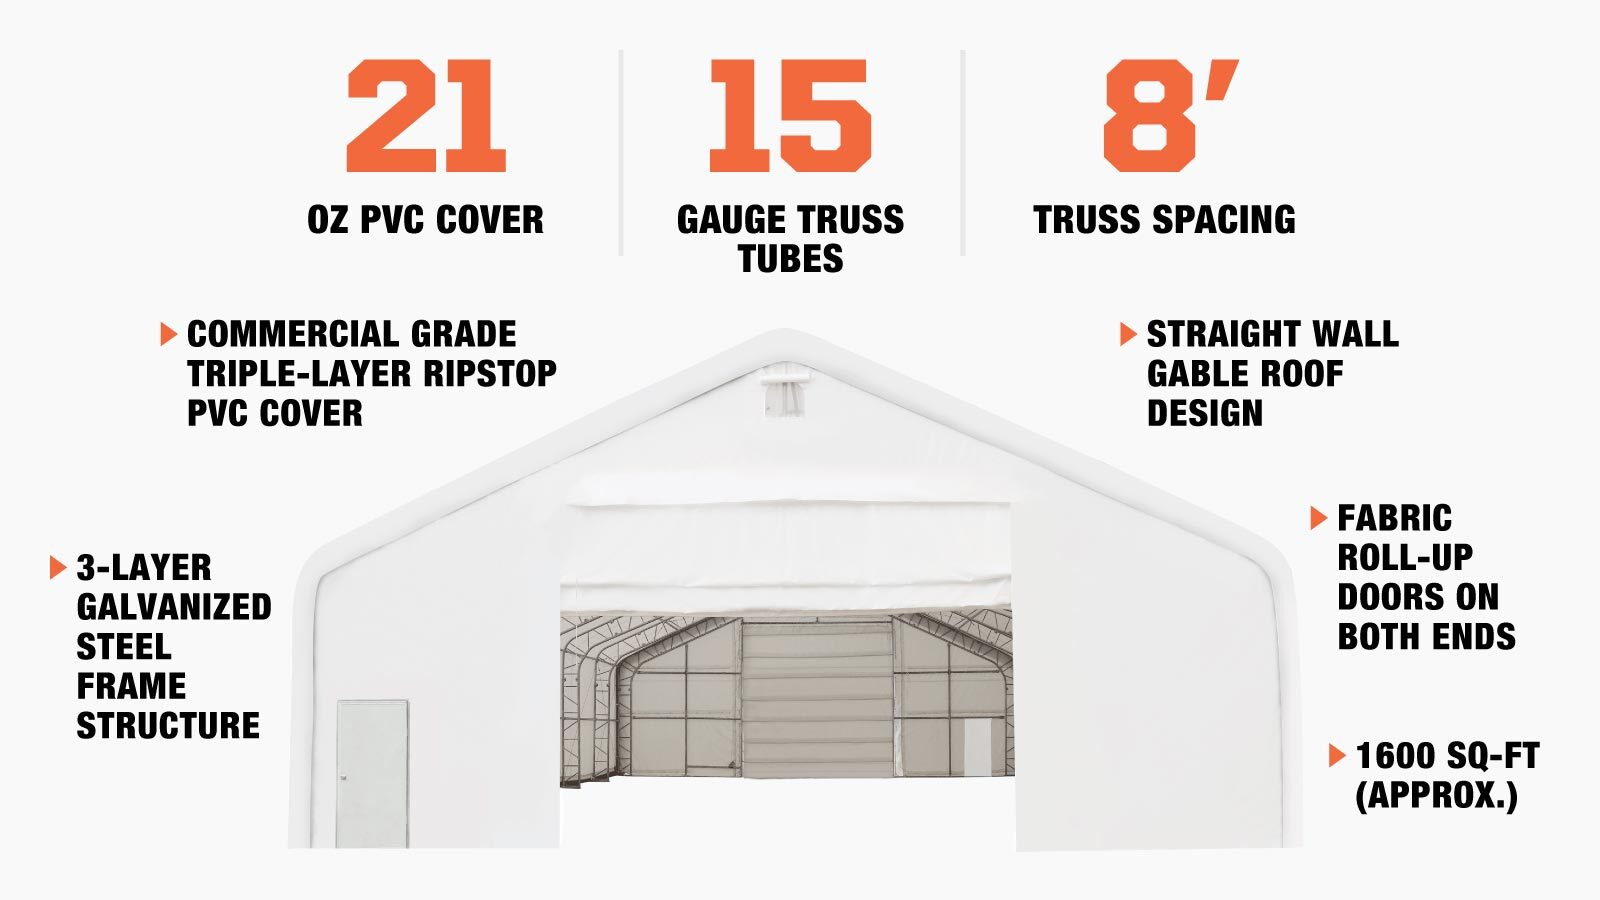 TMG Industrial Pro Series 40' x 40' Dual Truss Storage Shelter with Heavy Duty 21 oz PVC Cover & Drive Through Doors, TMG-DT4041-PRO (Previously TMG-DT4040-PRO)-description-image